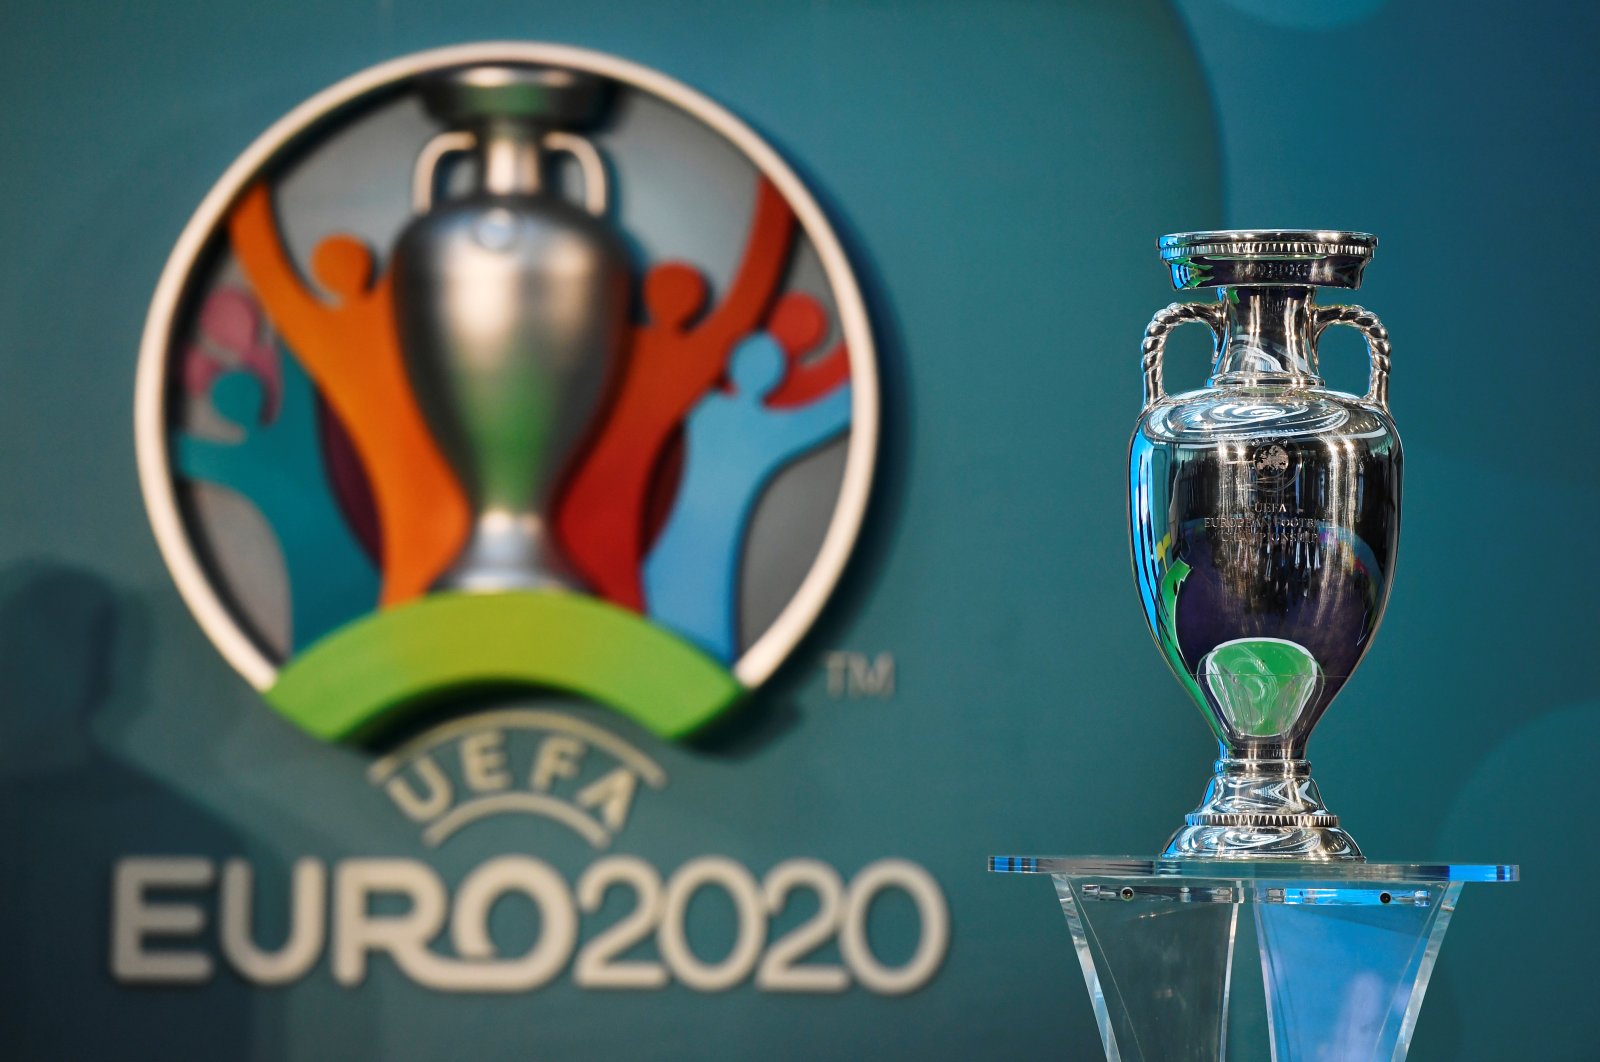 The UEFA EURO 2020 logo on display with the European Championship trophy London City Hall, London, Britain, Sept. 21, 2016. (Reuters Photo)